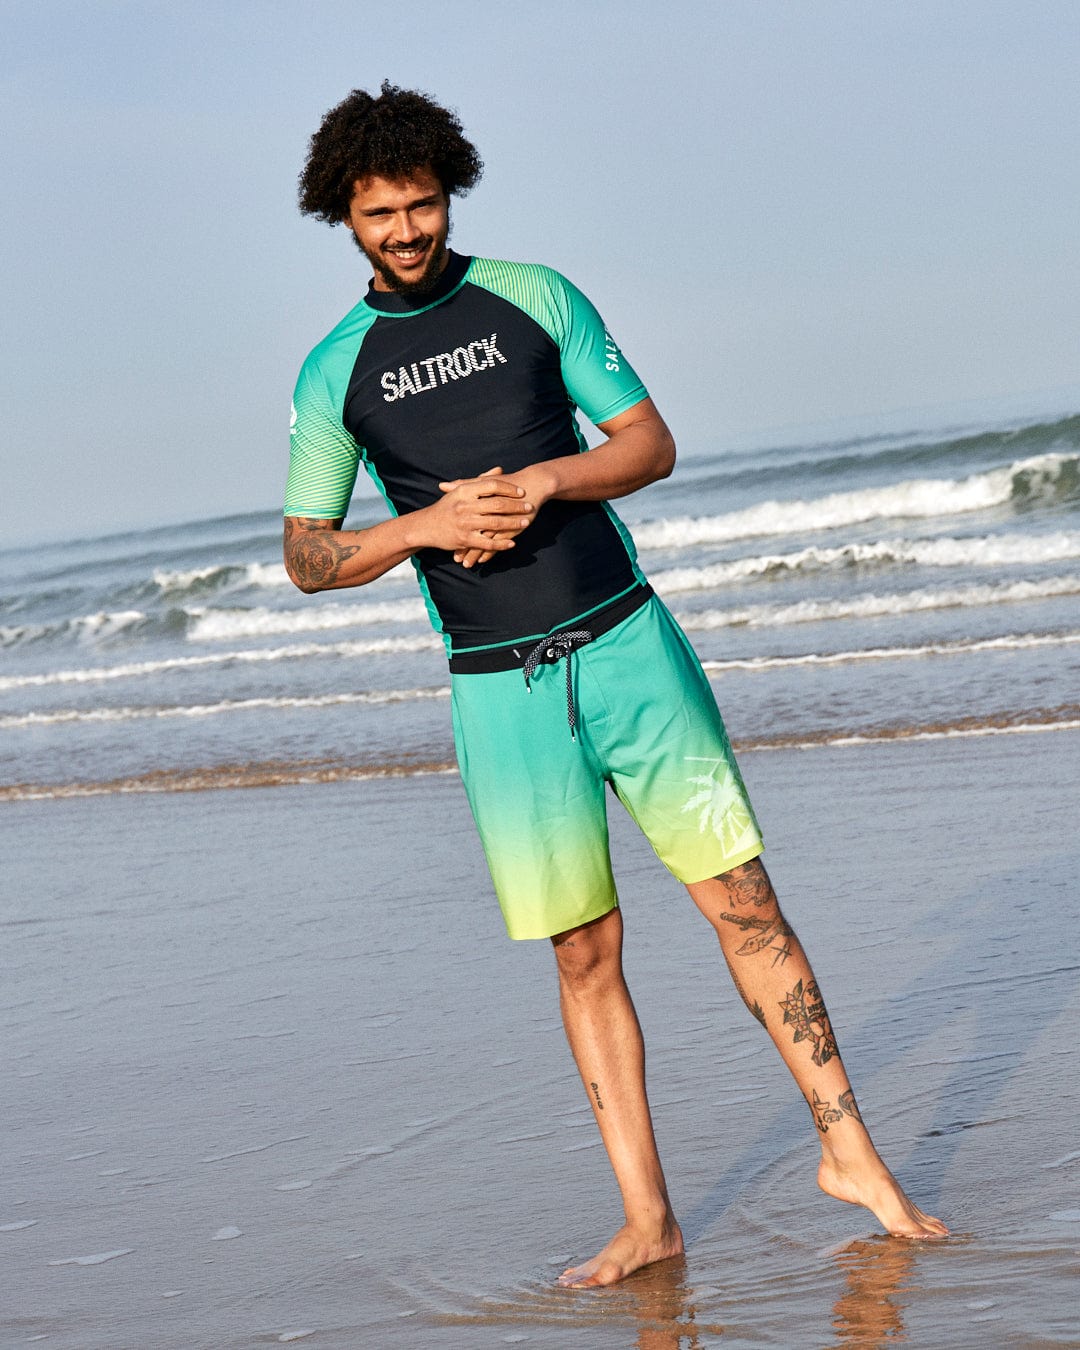 A man with curly hair and tattoos, wearing a teal and green rash guard made from Repreve recycled material and Saltrock Geo Palms - Mens Boardshorts - Green, stands on a sandy beach with waves in the background.